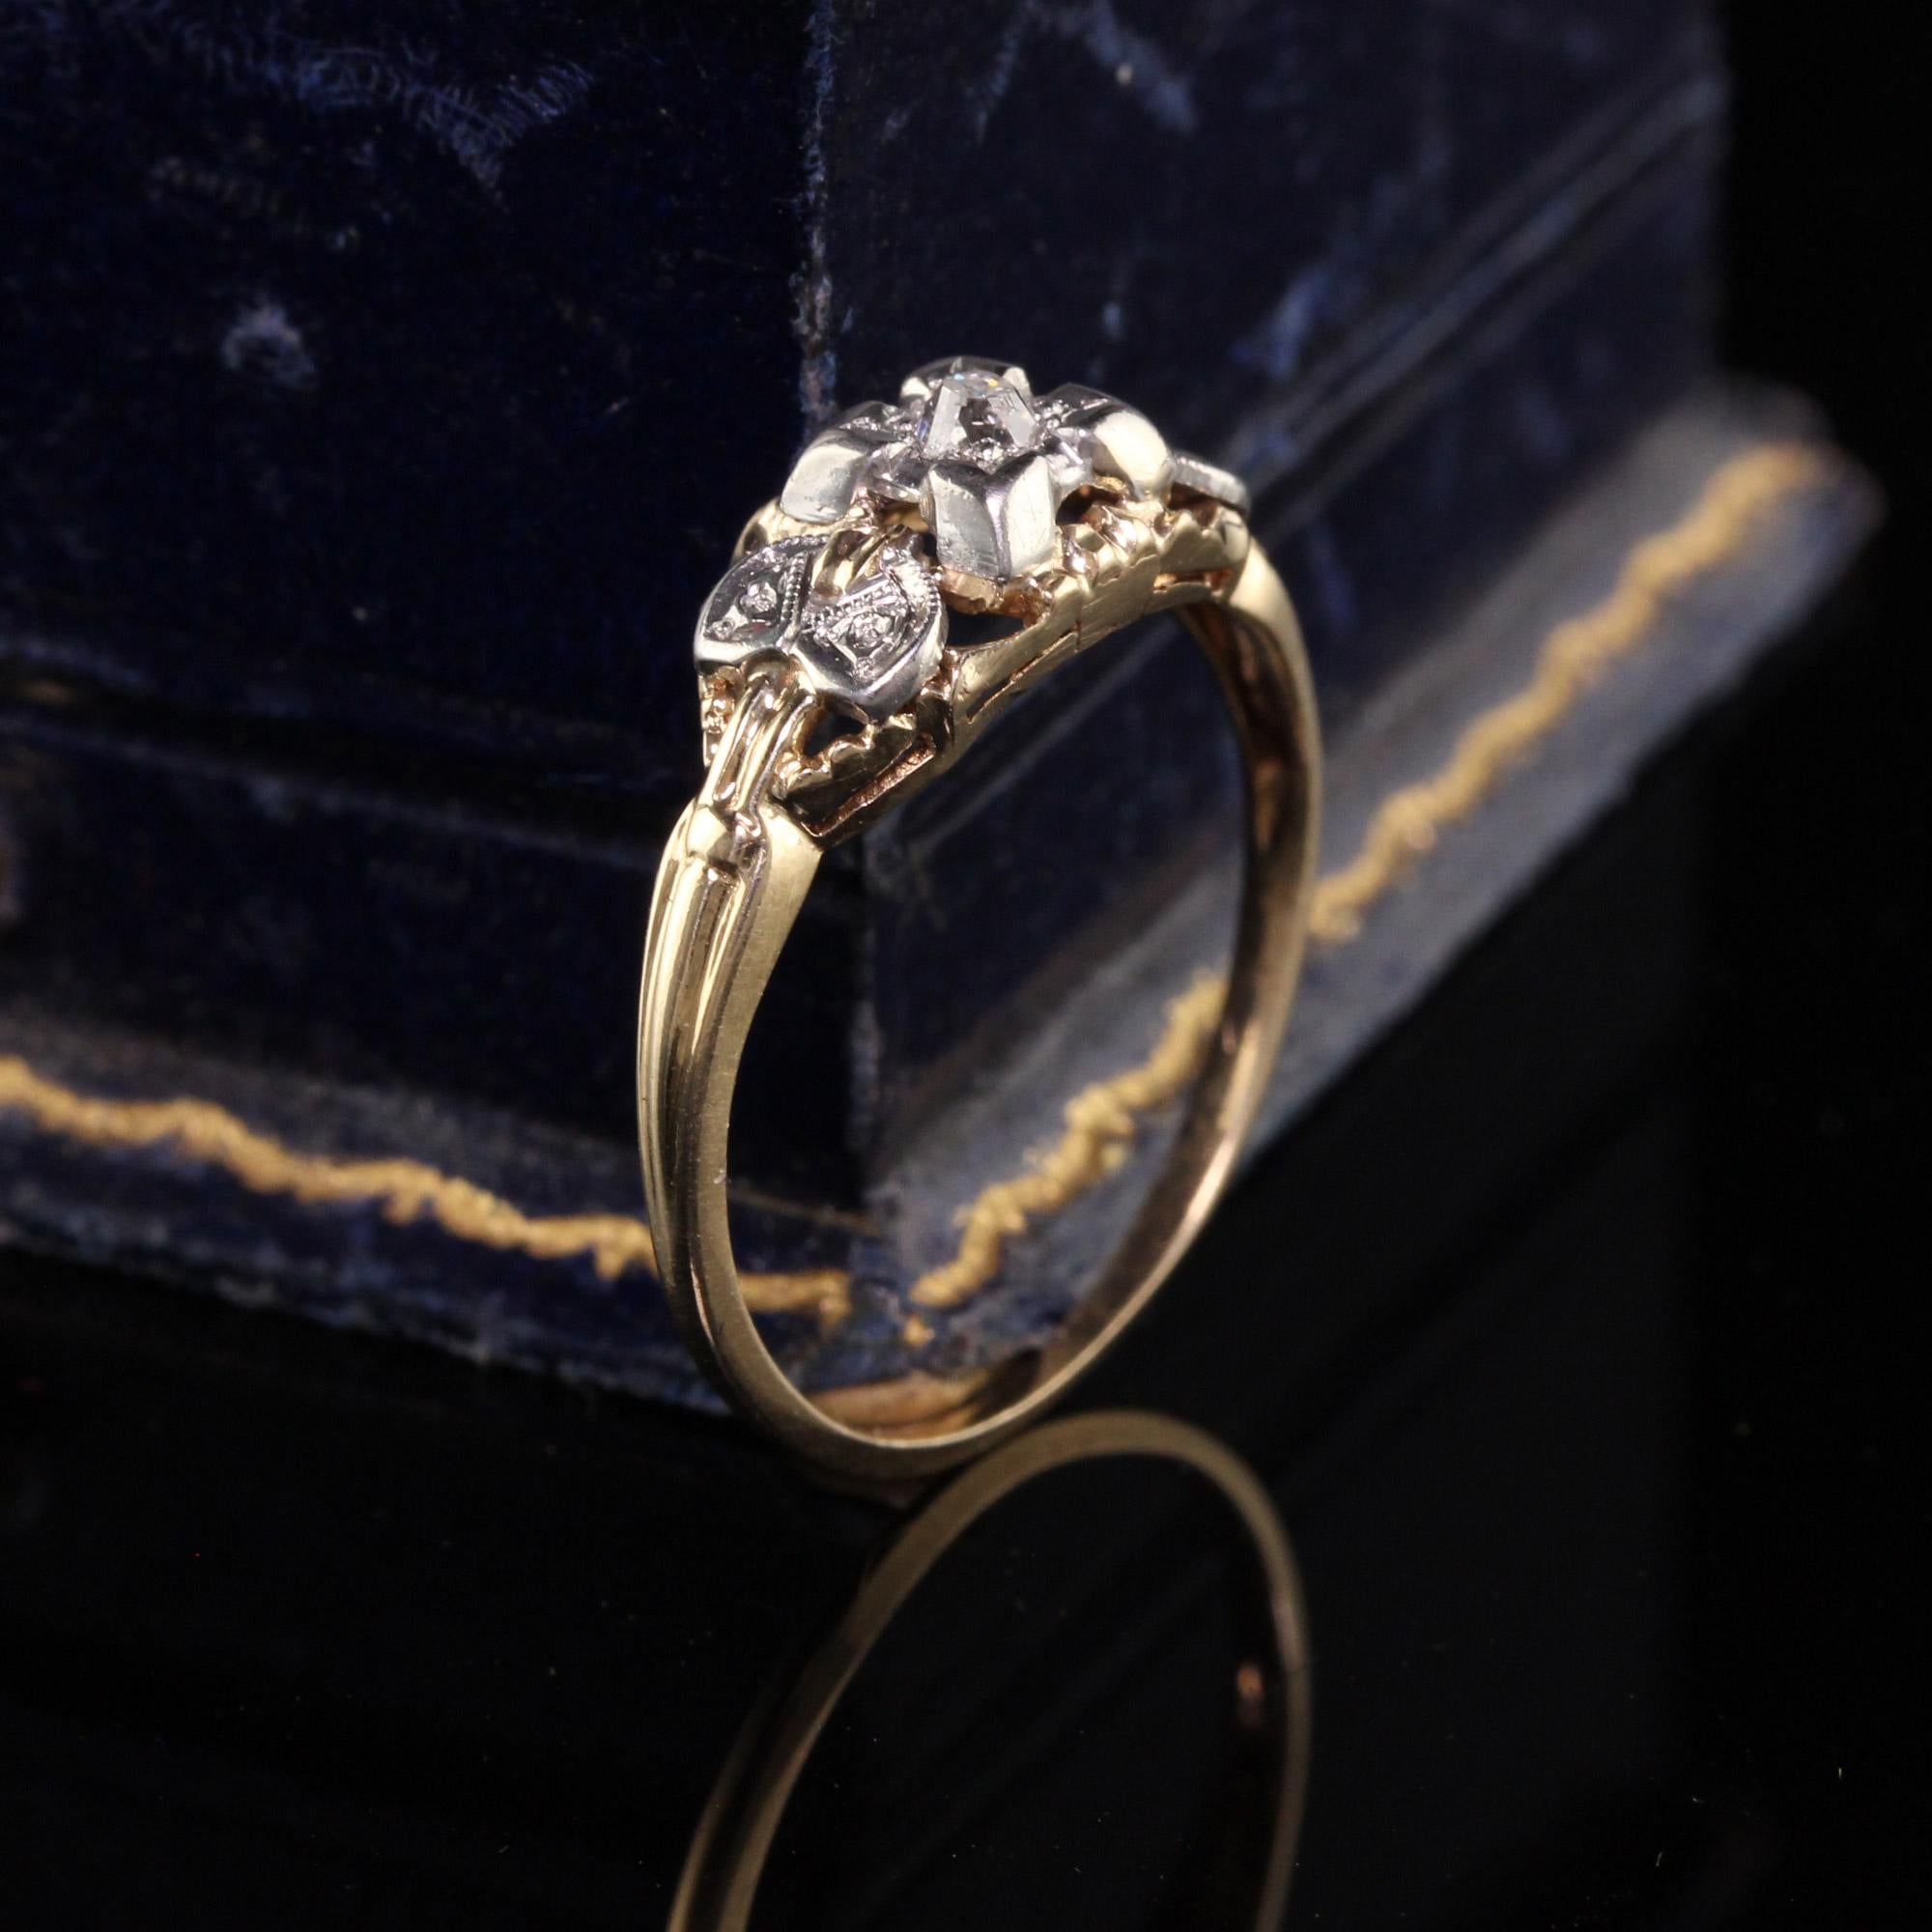 BeautifulAntique Art Deco 14K Yellow Gold Diamond Engagement Ring. This classic ring has a .10 ct old mine cut diamond in the center of a beautiful art deco mounting.

Item #R0884

Metal: 14K Yellow Gold

Diamond: .10 cts

Color: H

Clarity: